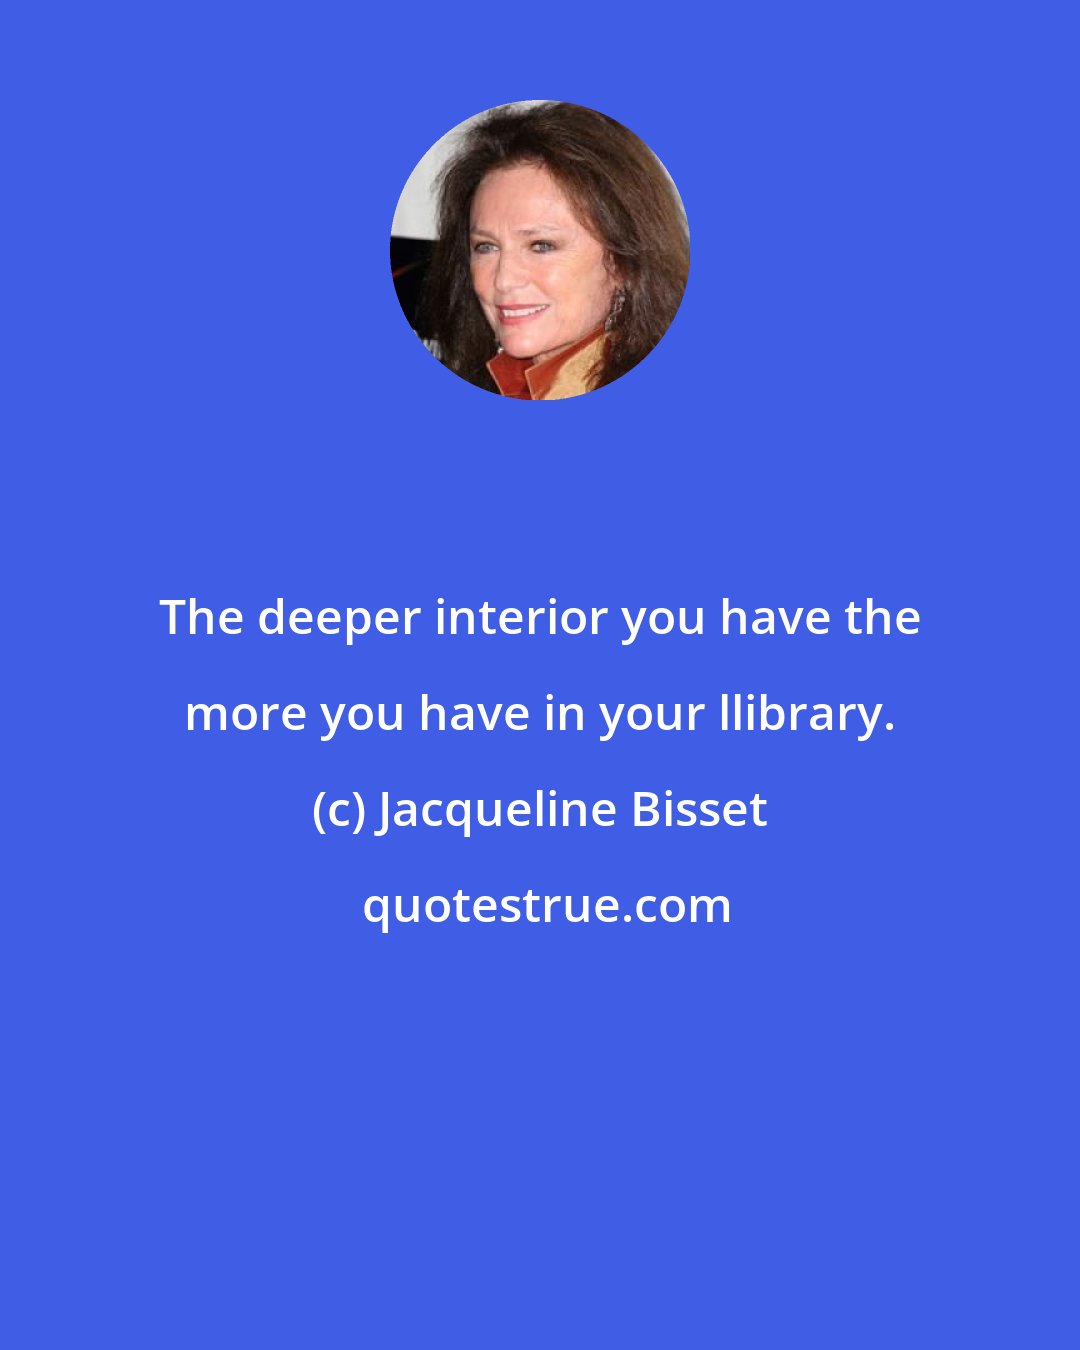 Jacqueline Bisset: The deeper interior you have the more you have in your llibrary.